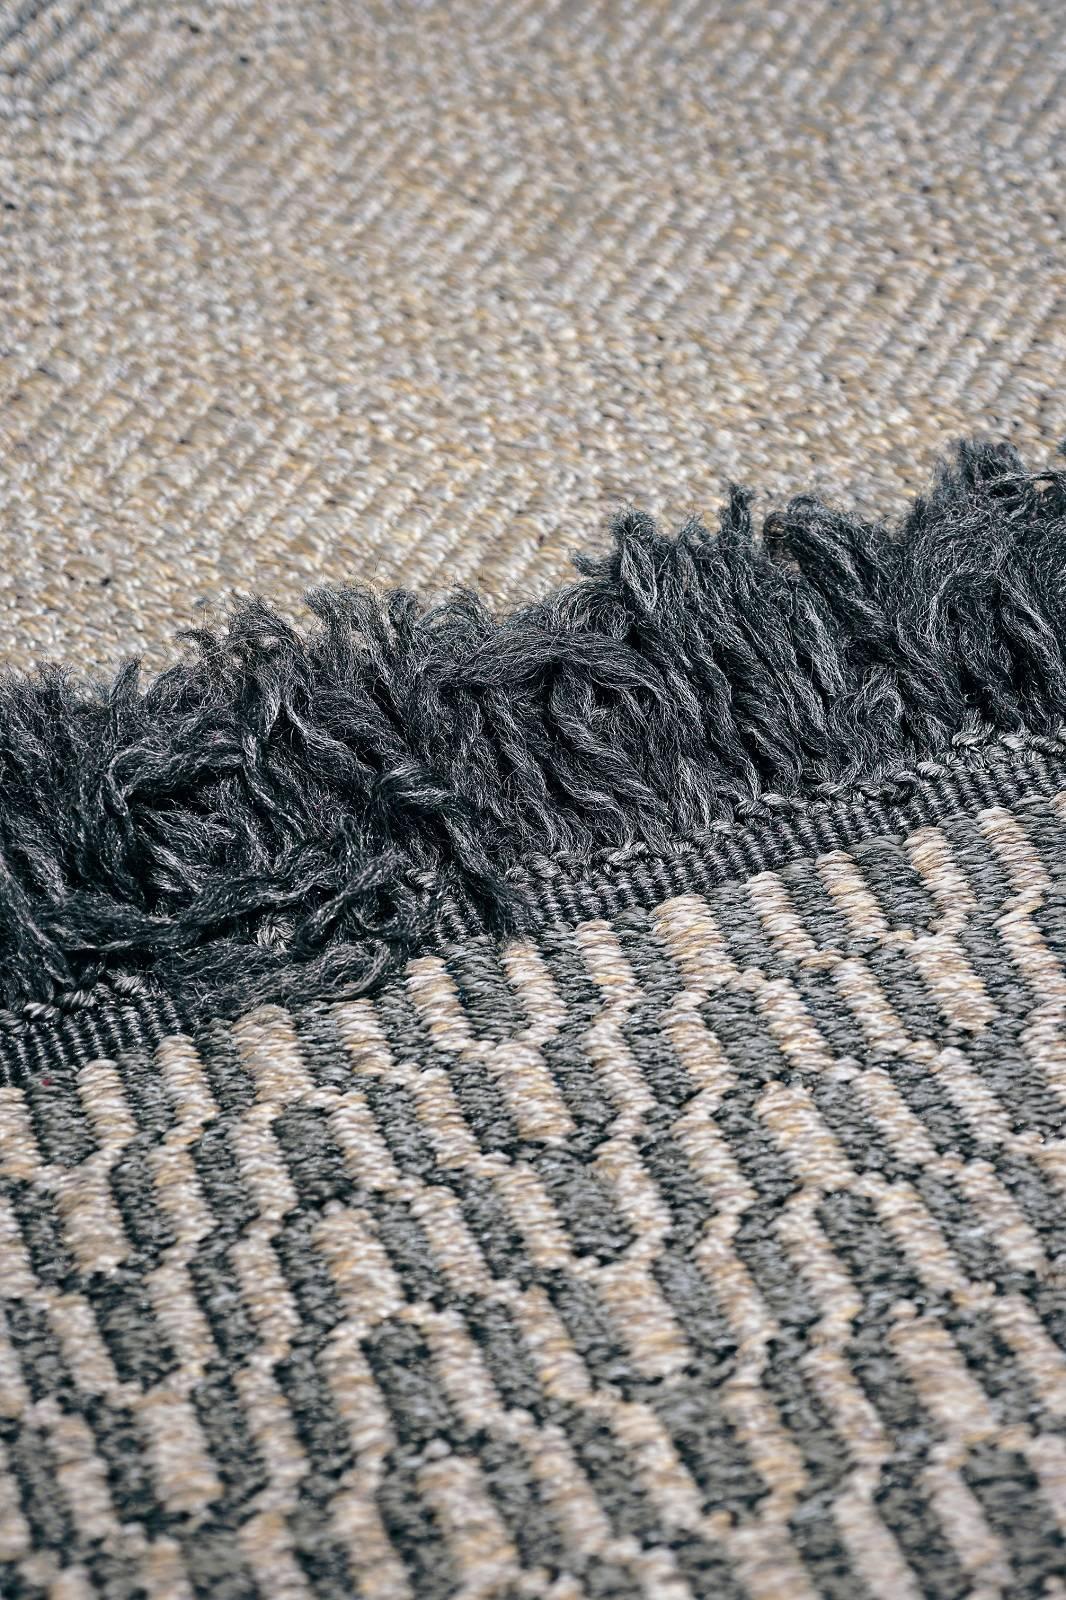 Babylon collection of outdoor rugs is defined by a contemporary taste, which combines understated refinement and a natural look.
Produced on hand looms from synthetic fibers in mélange nuances, Babylon rugs offer the highest outdoor performance,